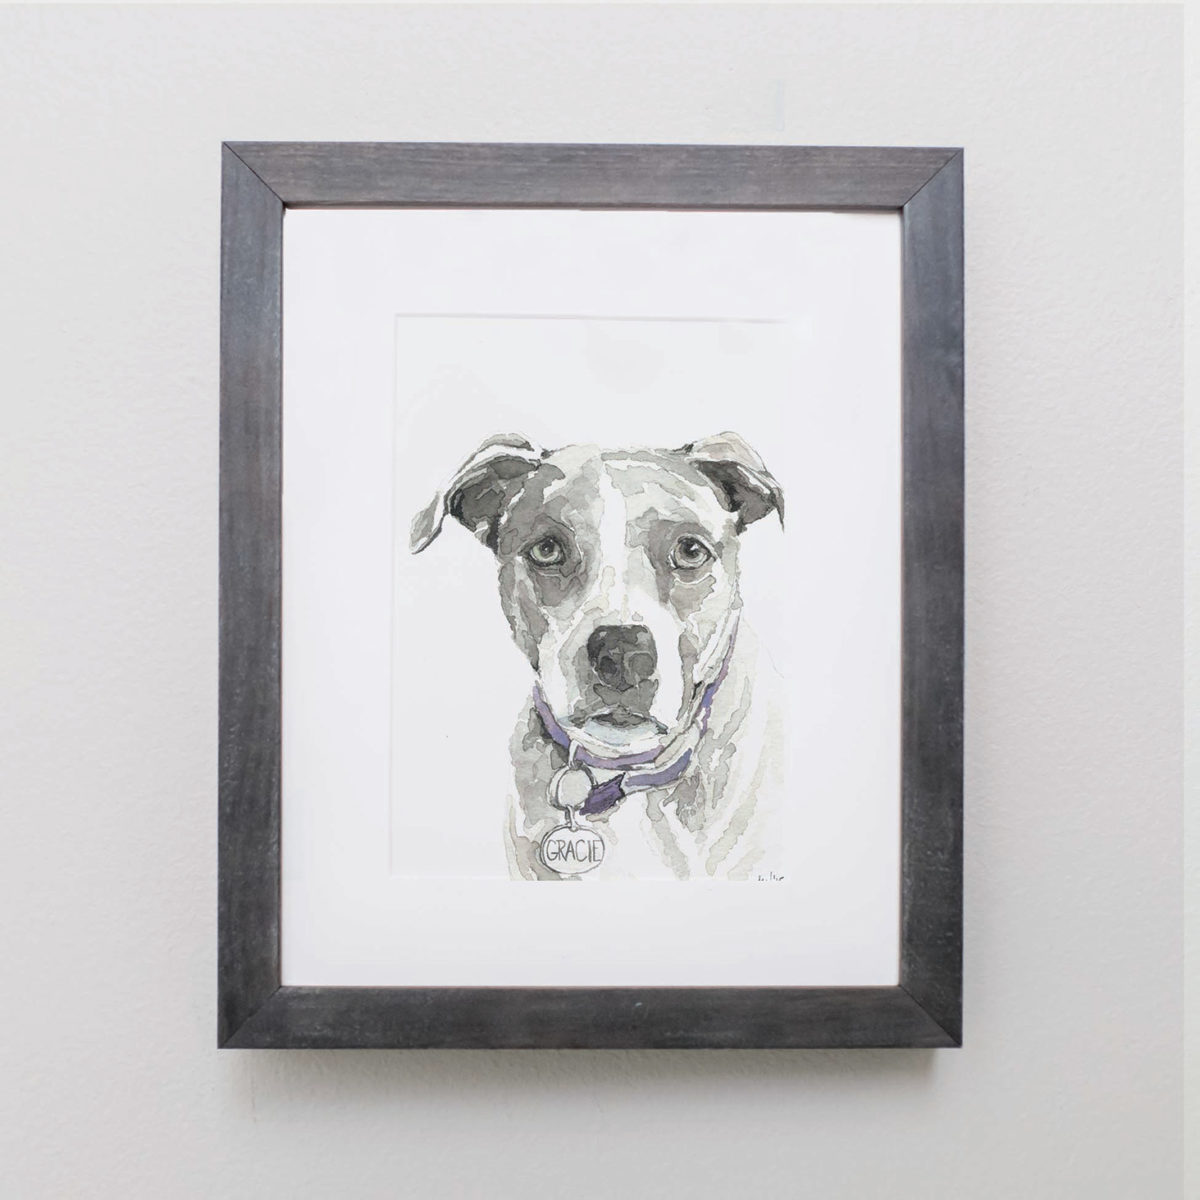 Watercolor of a gray pitbull in a gray frame